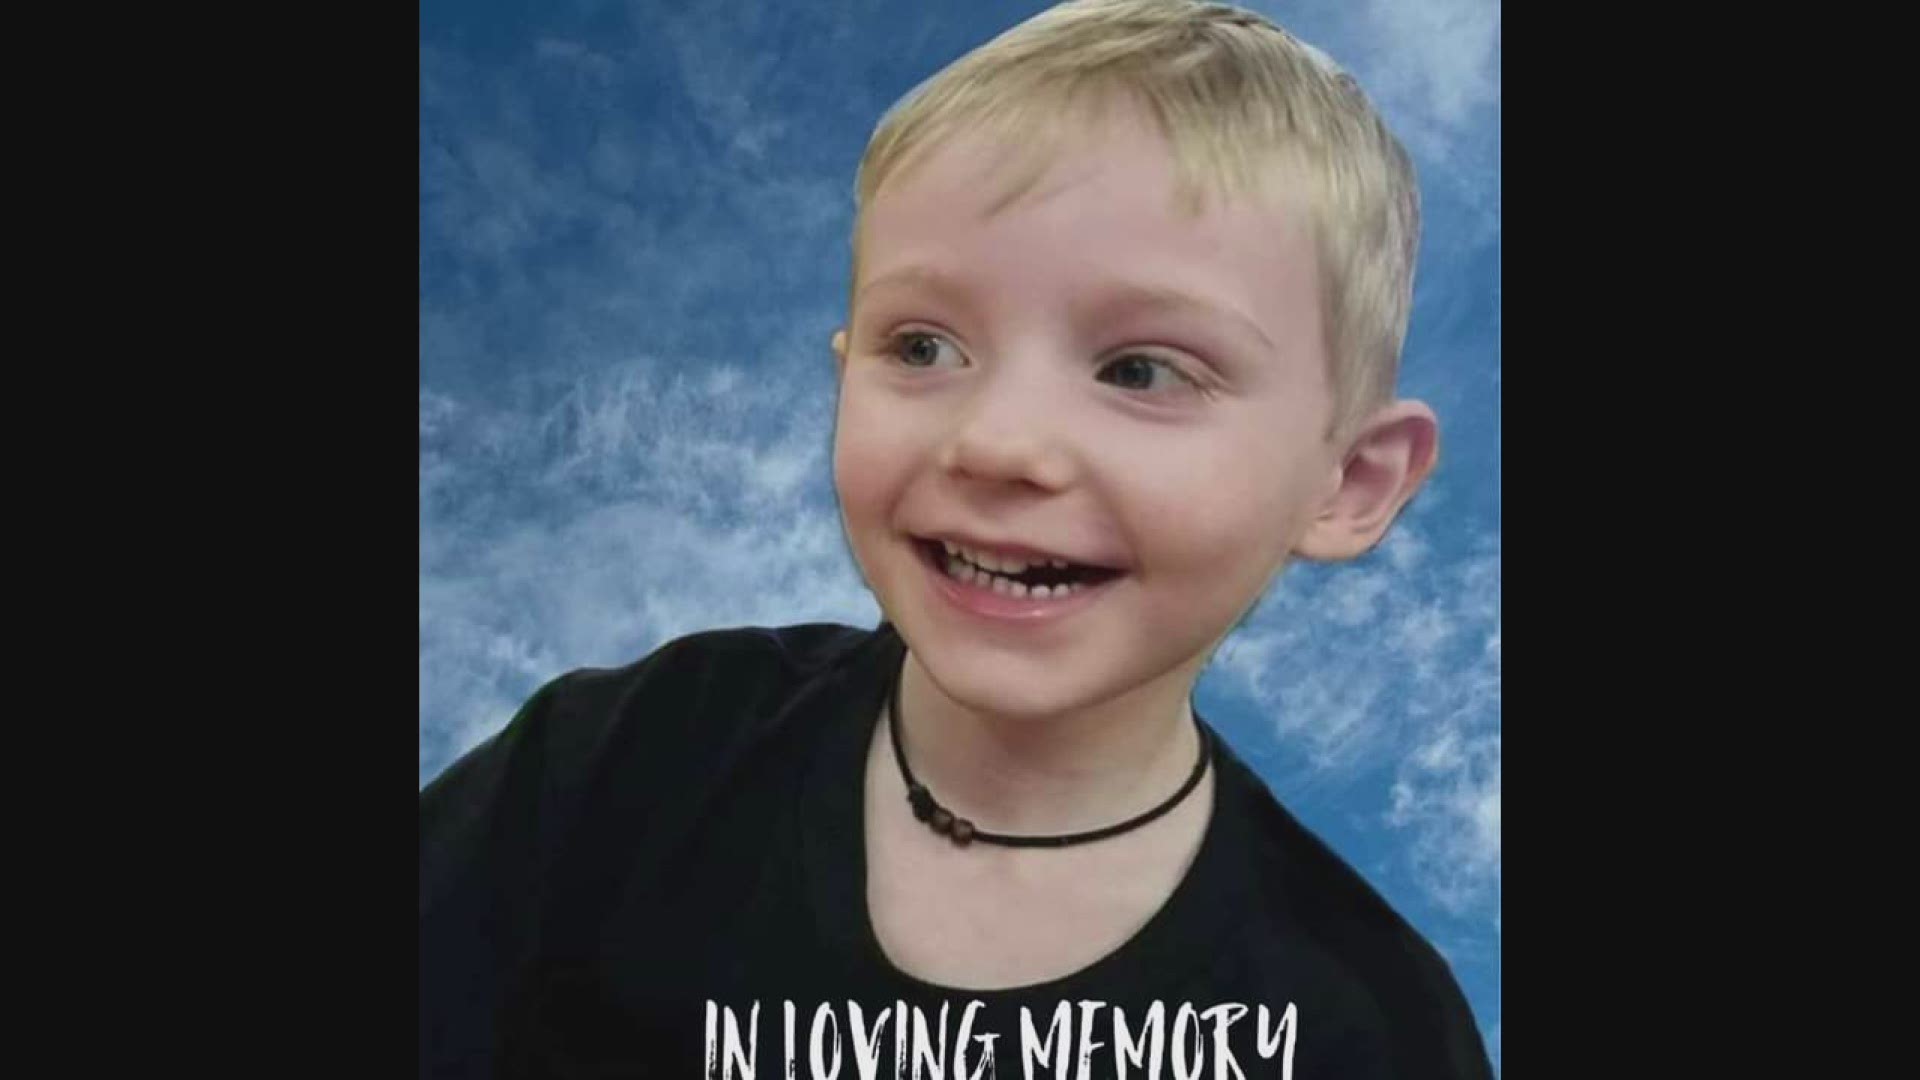 Maddox Ritch disappeared at a park. Days later, his body was found in a creek. His mom will never move on. But she's moving forward.